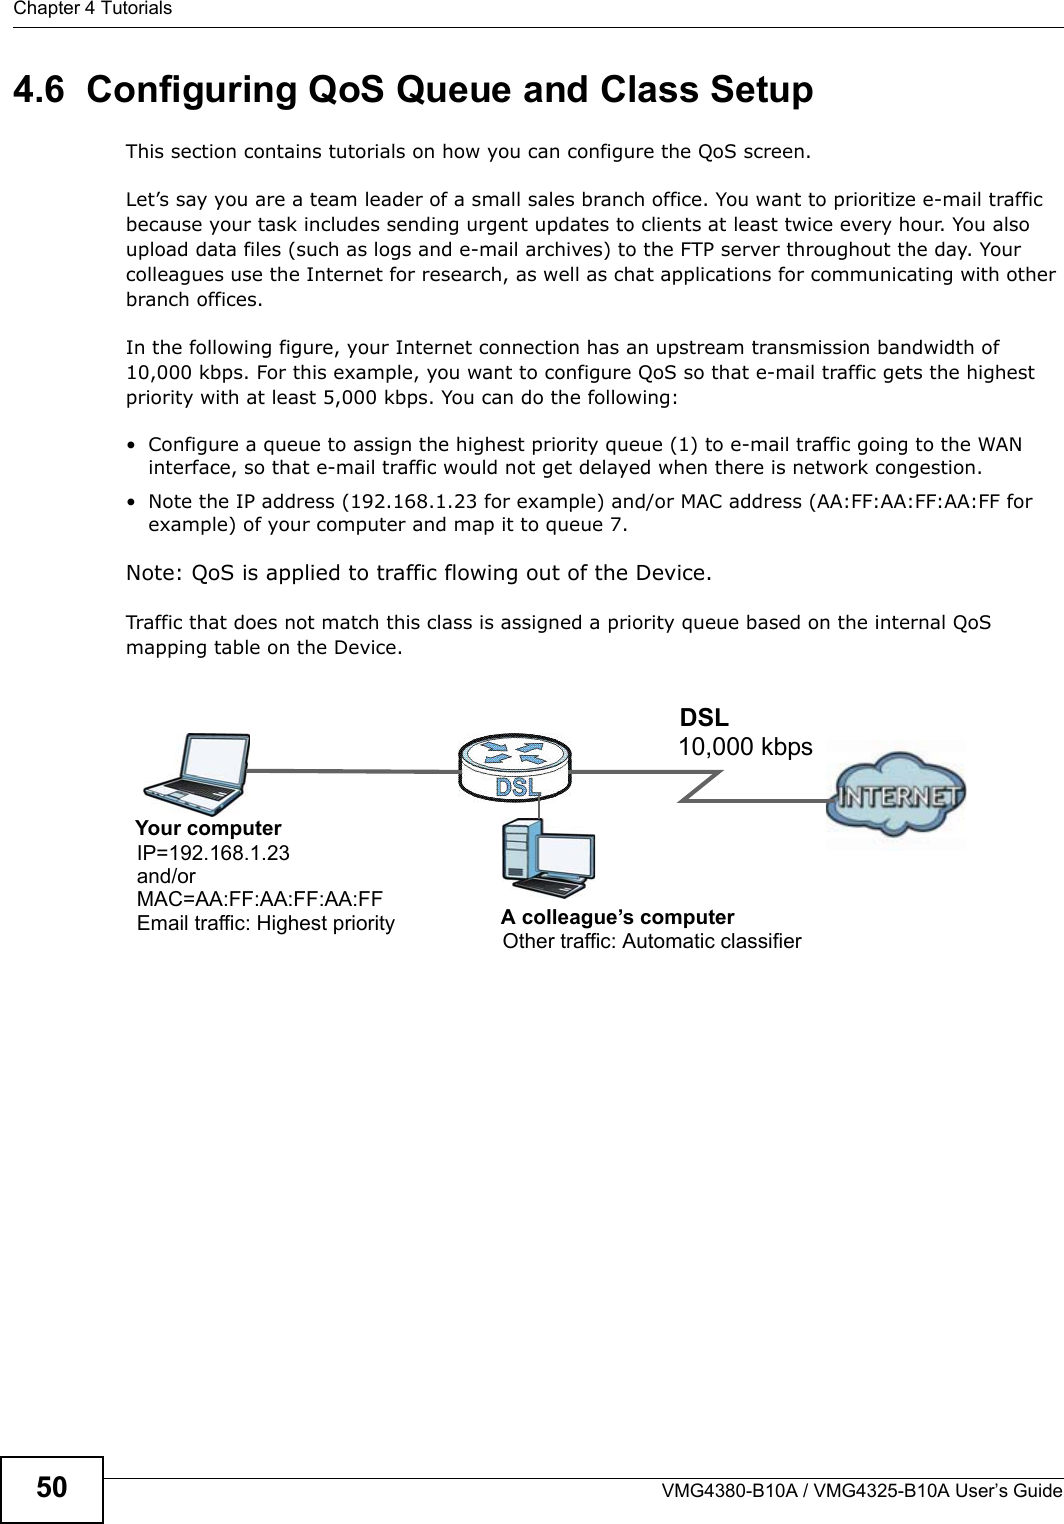 Chapter 4 TutorialsVMG4380-B10A / VMG4325-B10A User’s Guide504.6  Configuring QoS Queue and Class SetupThis section contains tutorials on how you can configure the QoS screen.Let’s say you are a team leader of a small sales branch office. You want to prioritize e-mail traffic because your task includes sending urgent updates to clients at least twice every hour. You also upload data files (such as logs and e-mail archives) to the FTP server throughout the day. Your colleagues use the Internet for research, as well as chat applications for communicating with other branch offices.In the following figure, your Internet connection has an upstream transmission bandwidth of 10,000 kbps. For this example, you want to configure QoS so that e-mail traffic gets the highest priority with at least 5,000 kbps. You can do the following: • Configure a queue to assign the highest priority queue (1) to e-mail traffic going to the WAN interface, so that e-mail traffic would not get delayed when there is network congestion. • Note the IP address (192.168.1.23 for example) and/or MAC address (AA:FF:AA:FF:AA:FF for example) of your computer and map it to queue 7.Note: QoS is applied to traffic flowing out of the Device.Traffic that does not match this class is assigned a priority queue based on the internal QoS mapping table on the Device.QoS Example10,000 kbpsDSLYour computerIP=192.168.1.23A colleague’s computerOther traffic: Automatic classifierand/orMAC=AA:FF:AA:FF:AA:FFEmail traffic: Highest priority